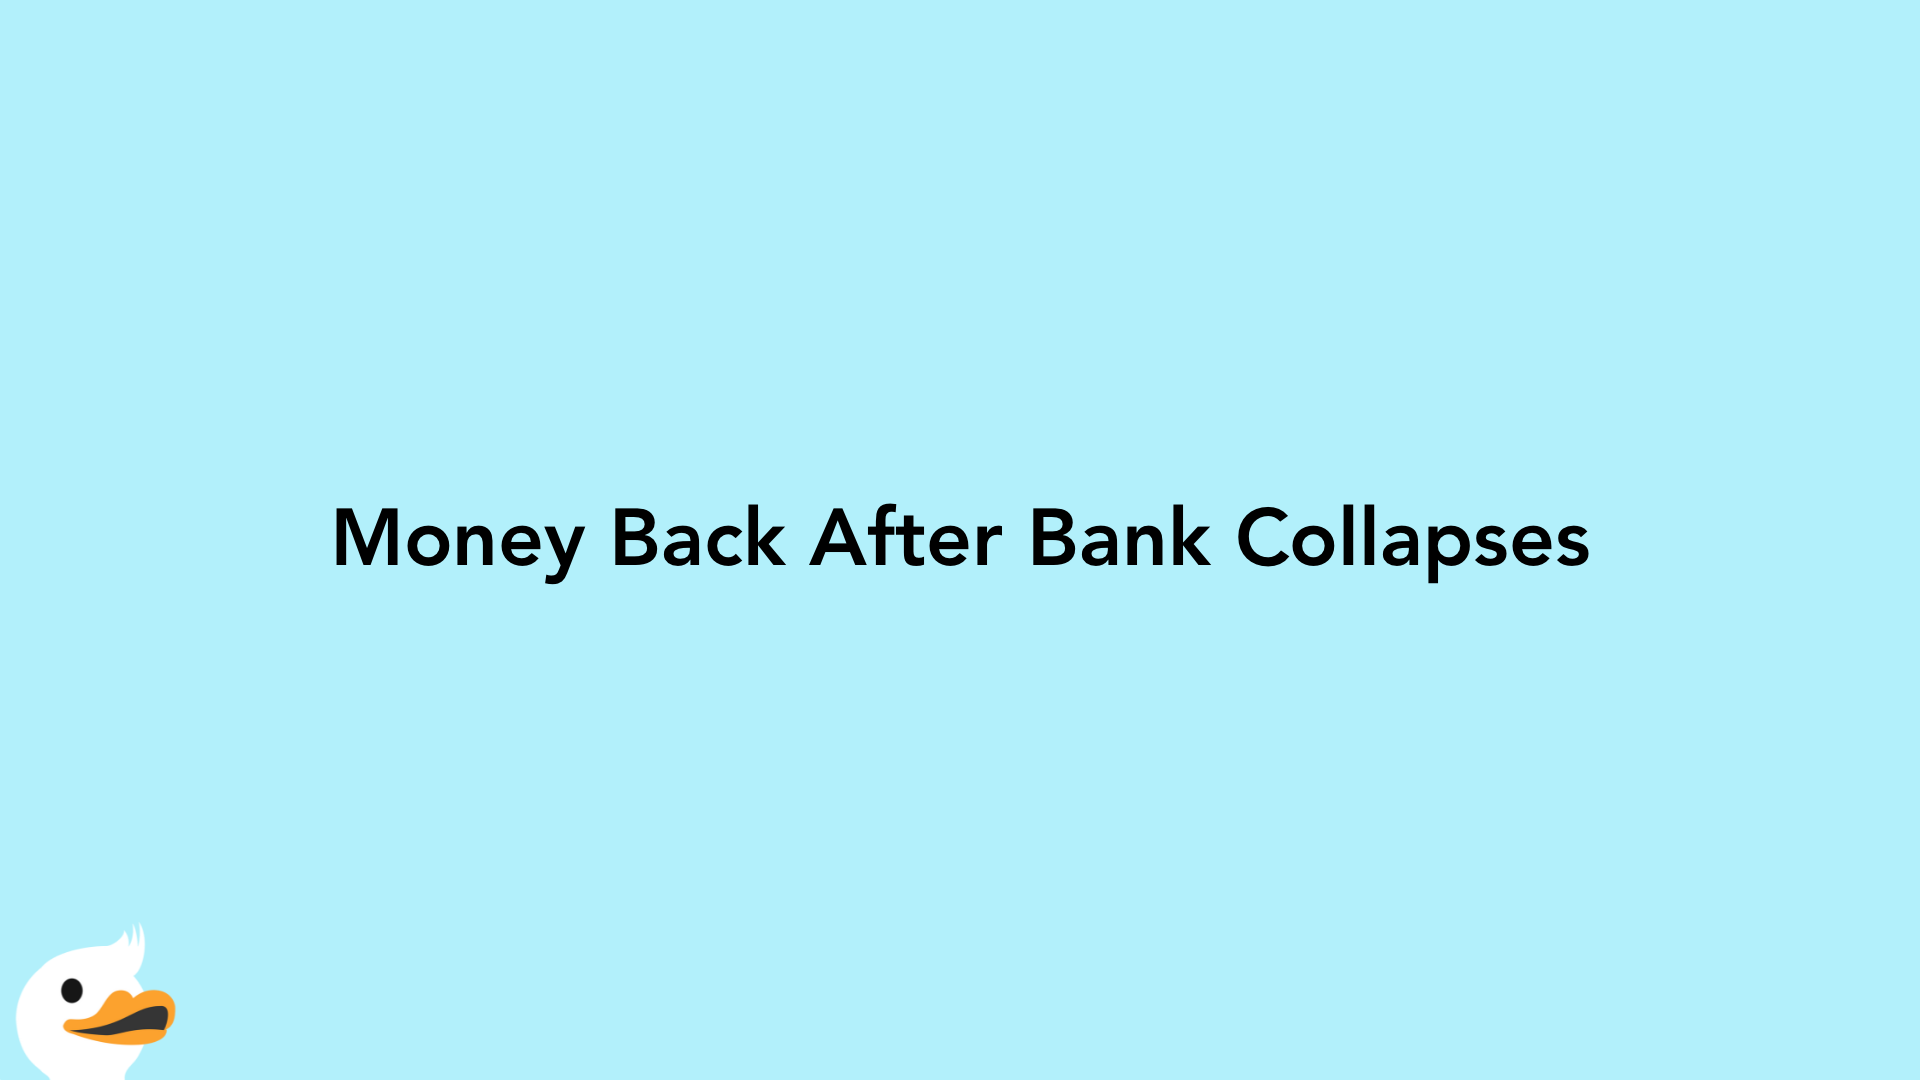 Money Back After Bank Collapses